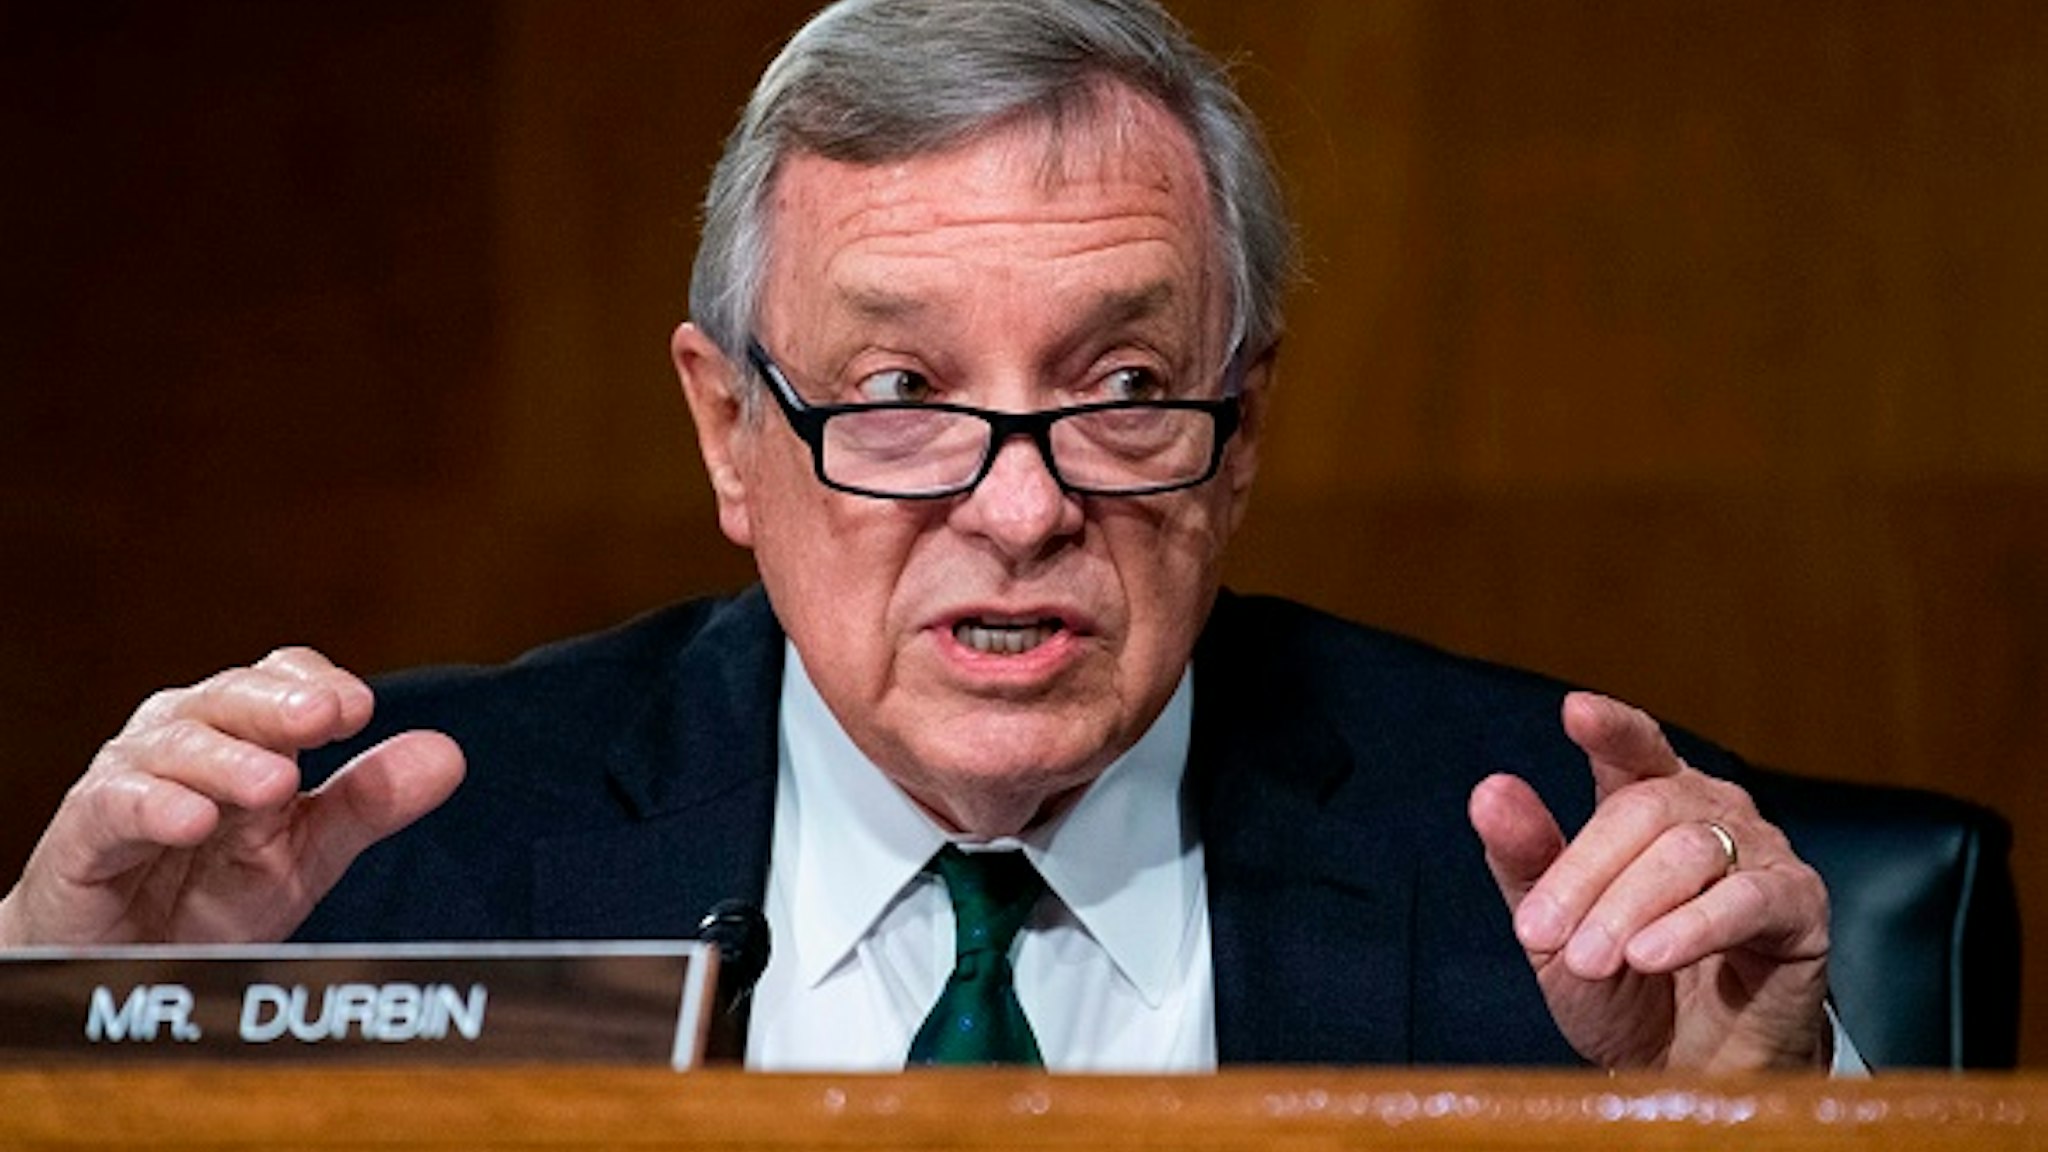 Sen. Richard Durbin, D-Ill., asks a question during the Senate Judiciary Committee hearing titled Police Use of Force and Community Relations, in Dirksen Senate Office Building in Washington, DC, on June 16, 2020.